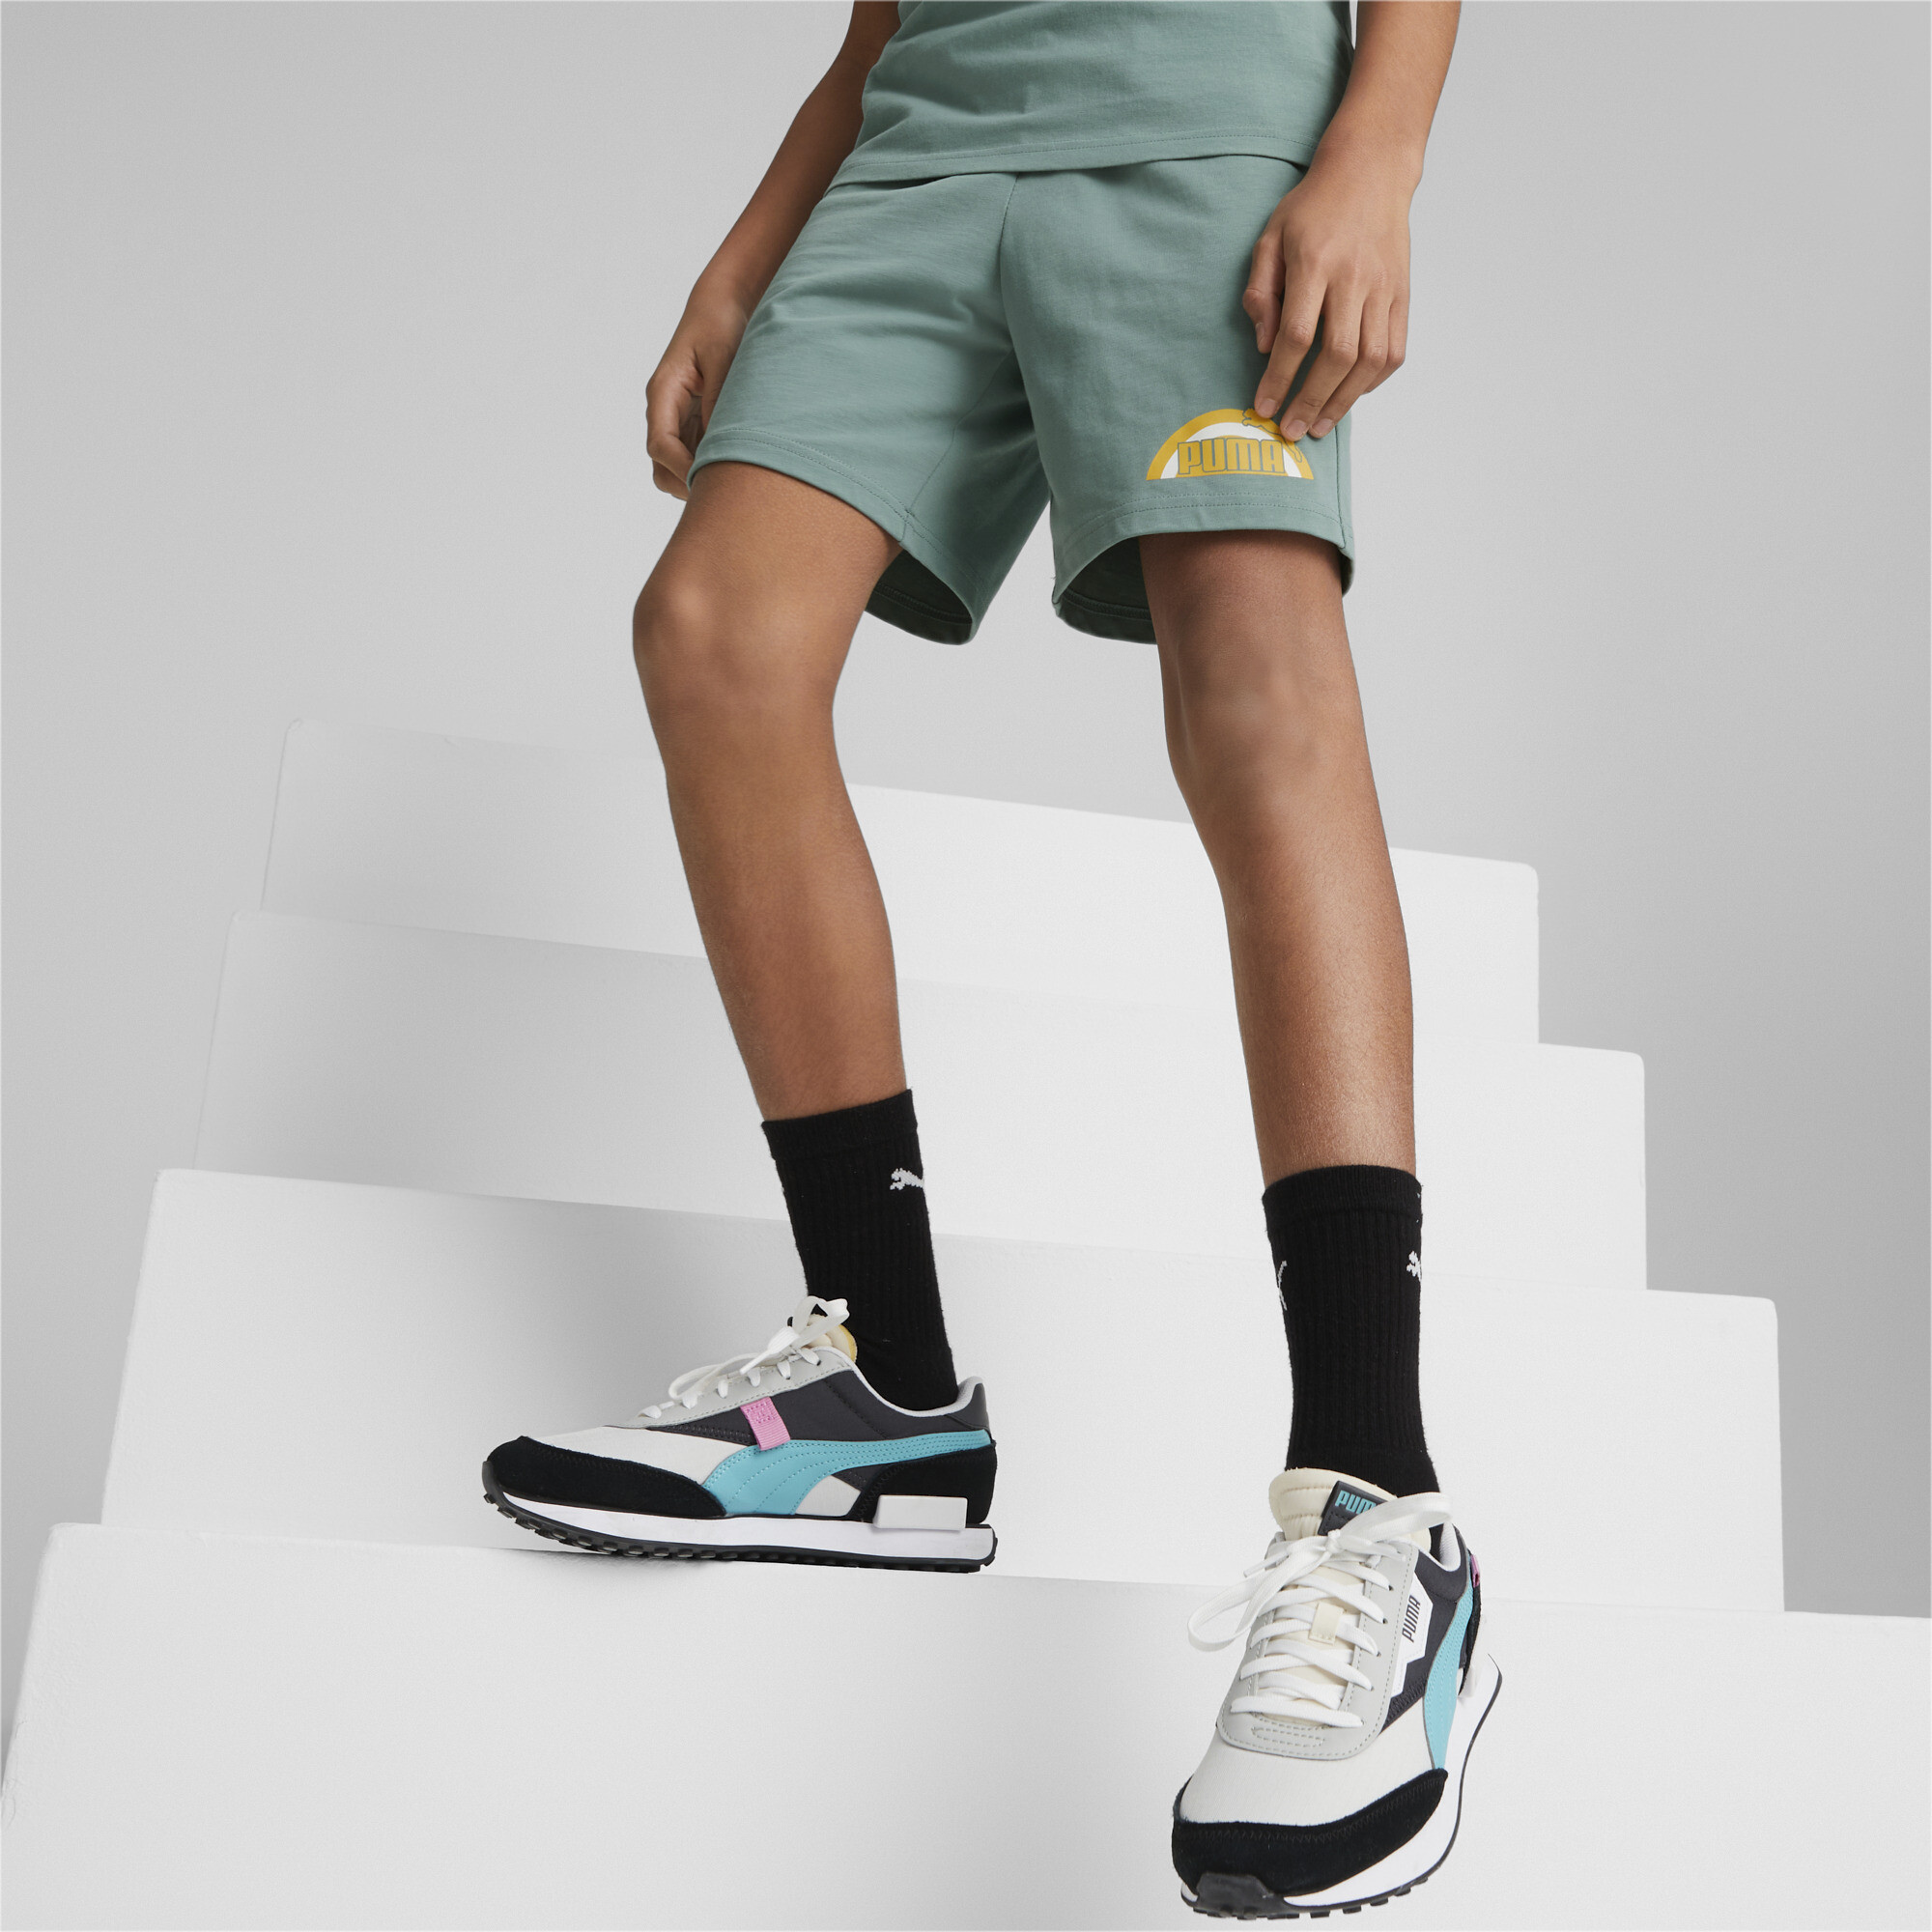 PUMA Essentials+ Street Art Shorts In Gray, Size 7-8 Youth